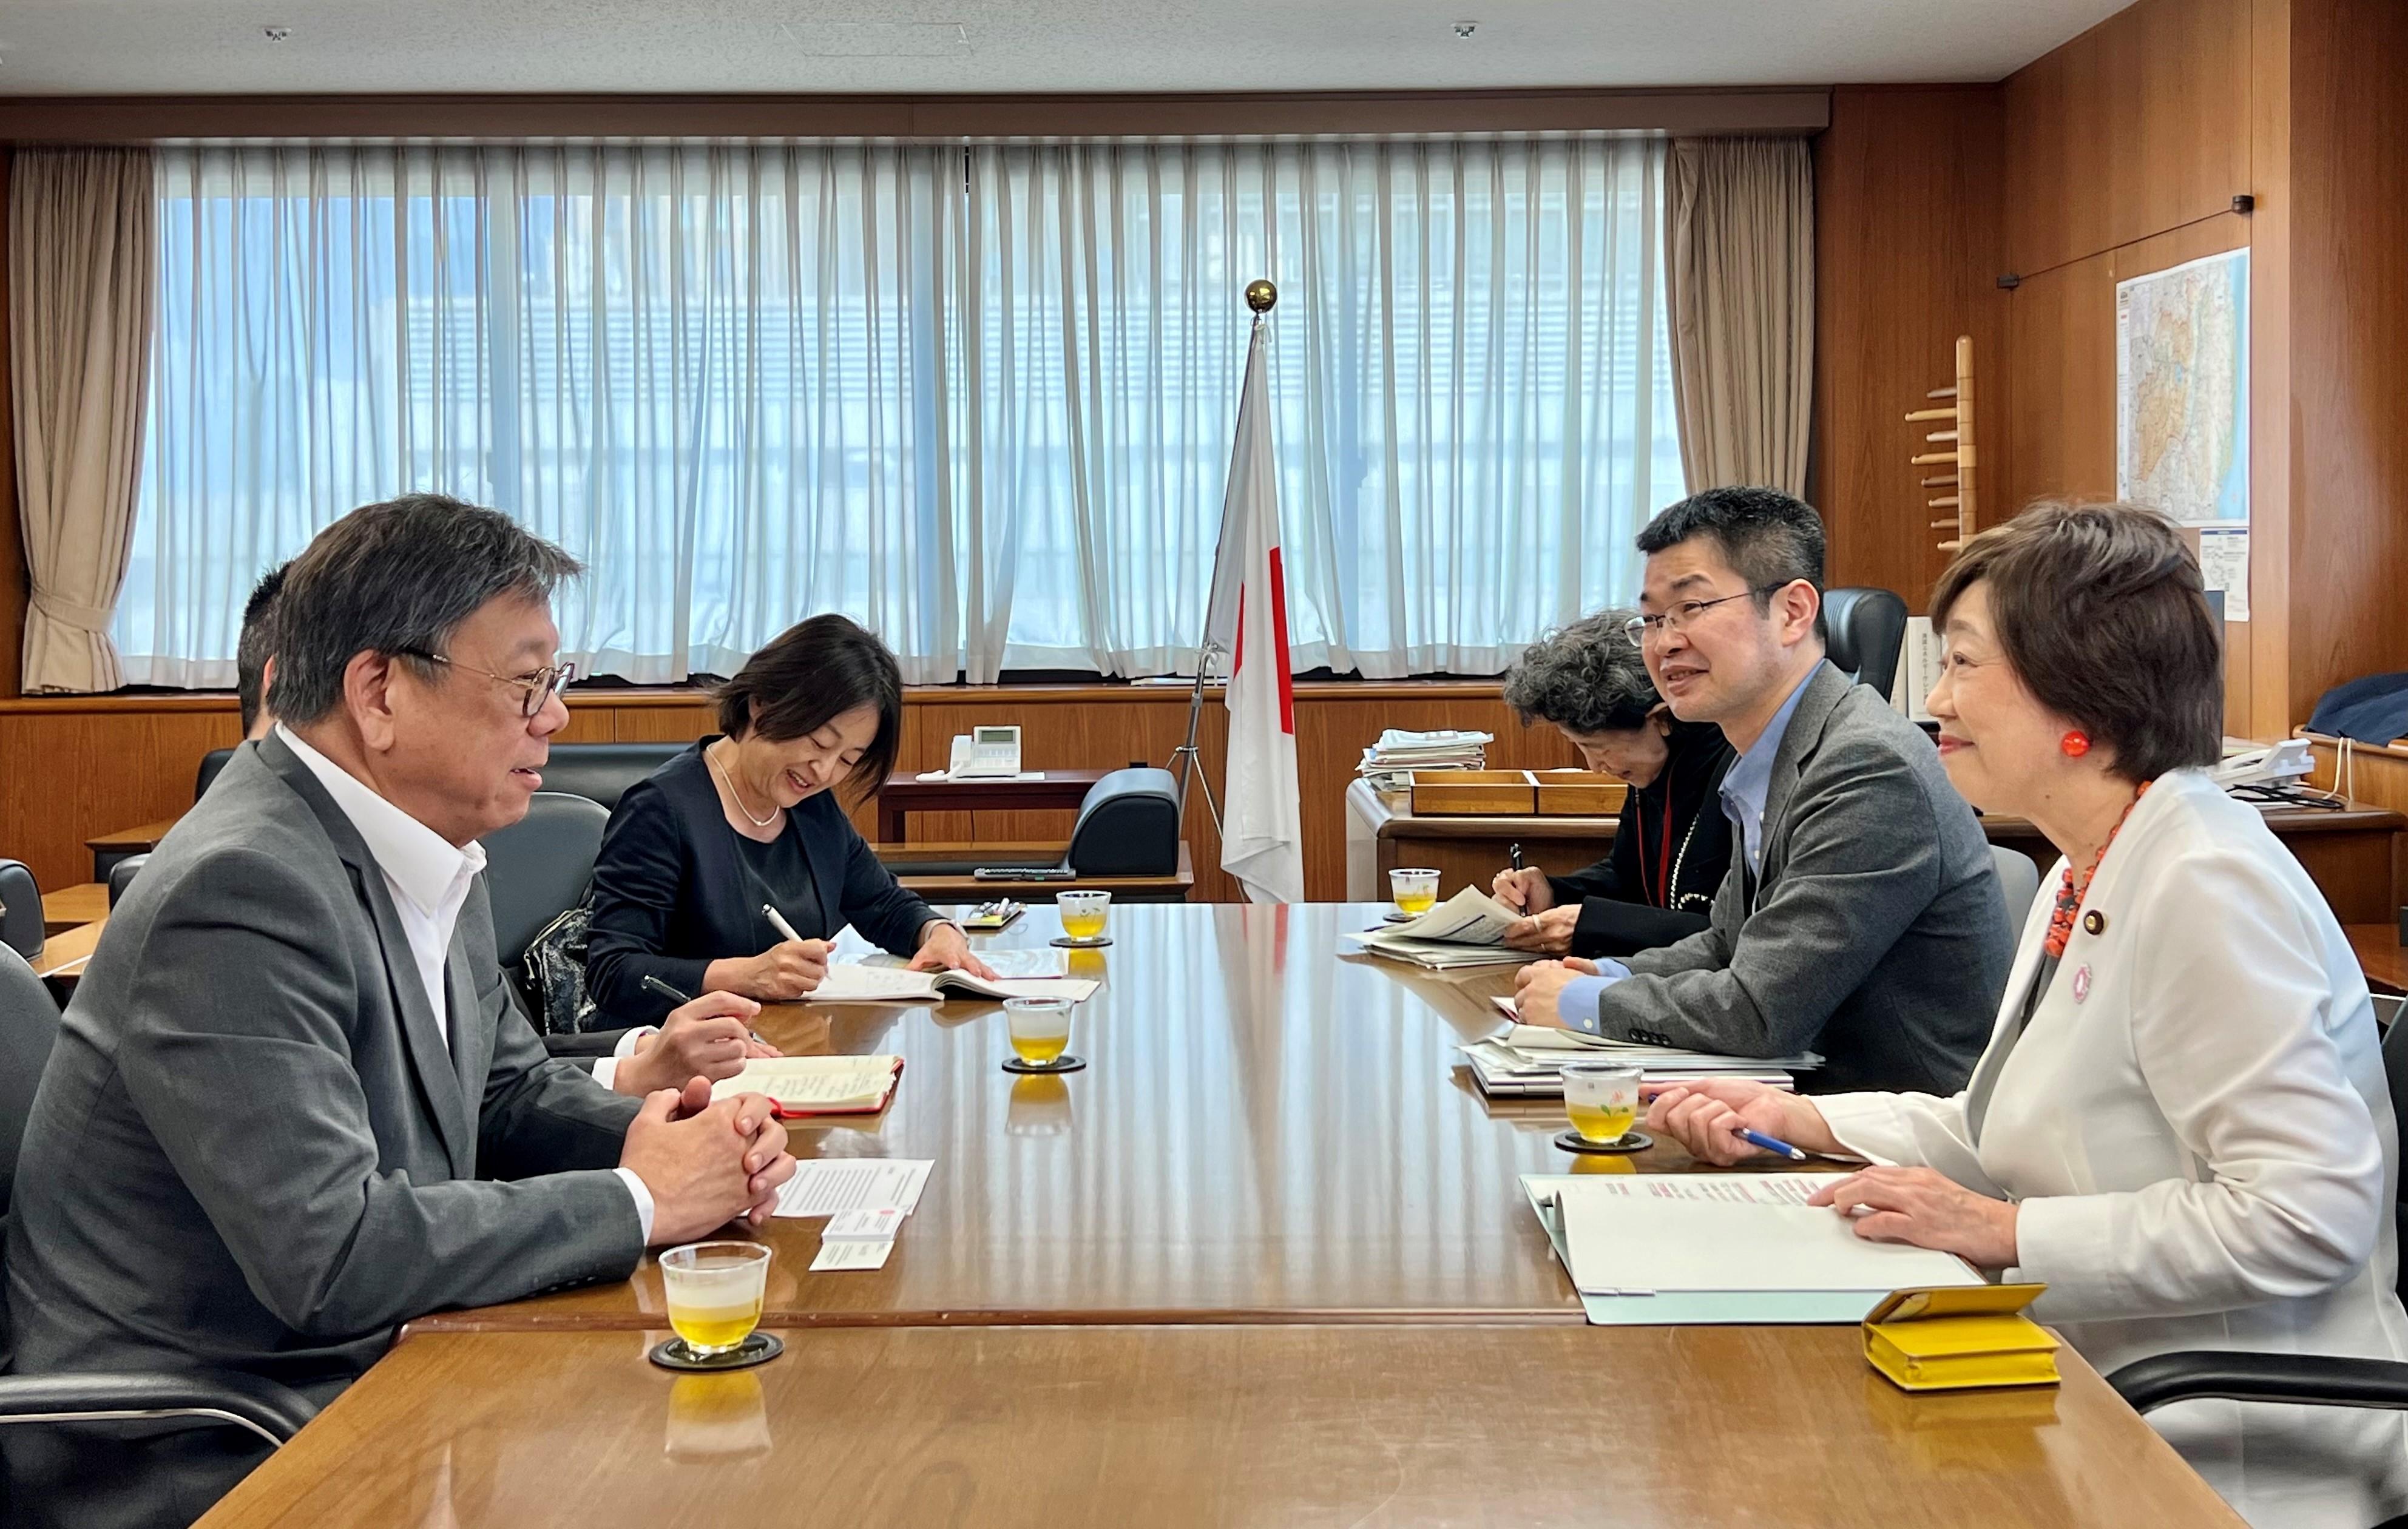 The Secretary for Commerce and Economic Development, Mr Algernon Yau (first left), meets with State Minister of Economy, Trade and Industry of Japan Ms Fusae Ota (first right), in Tokyo, Japan, today (June 20) to give her an update on Hong Kong's latest developments and exchange views on promoting closer bilateral relation and deepening regional co-operation.